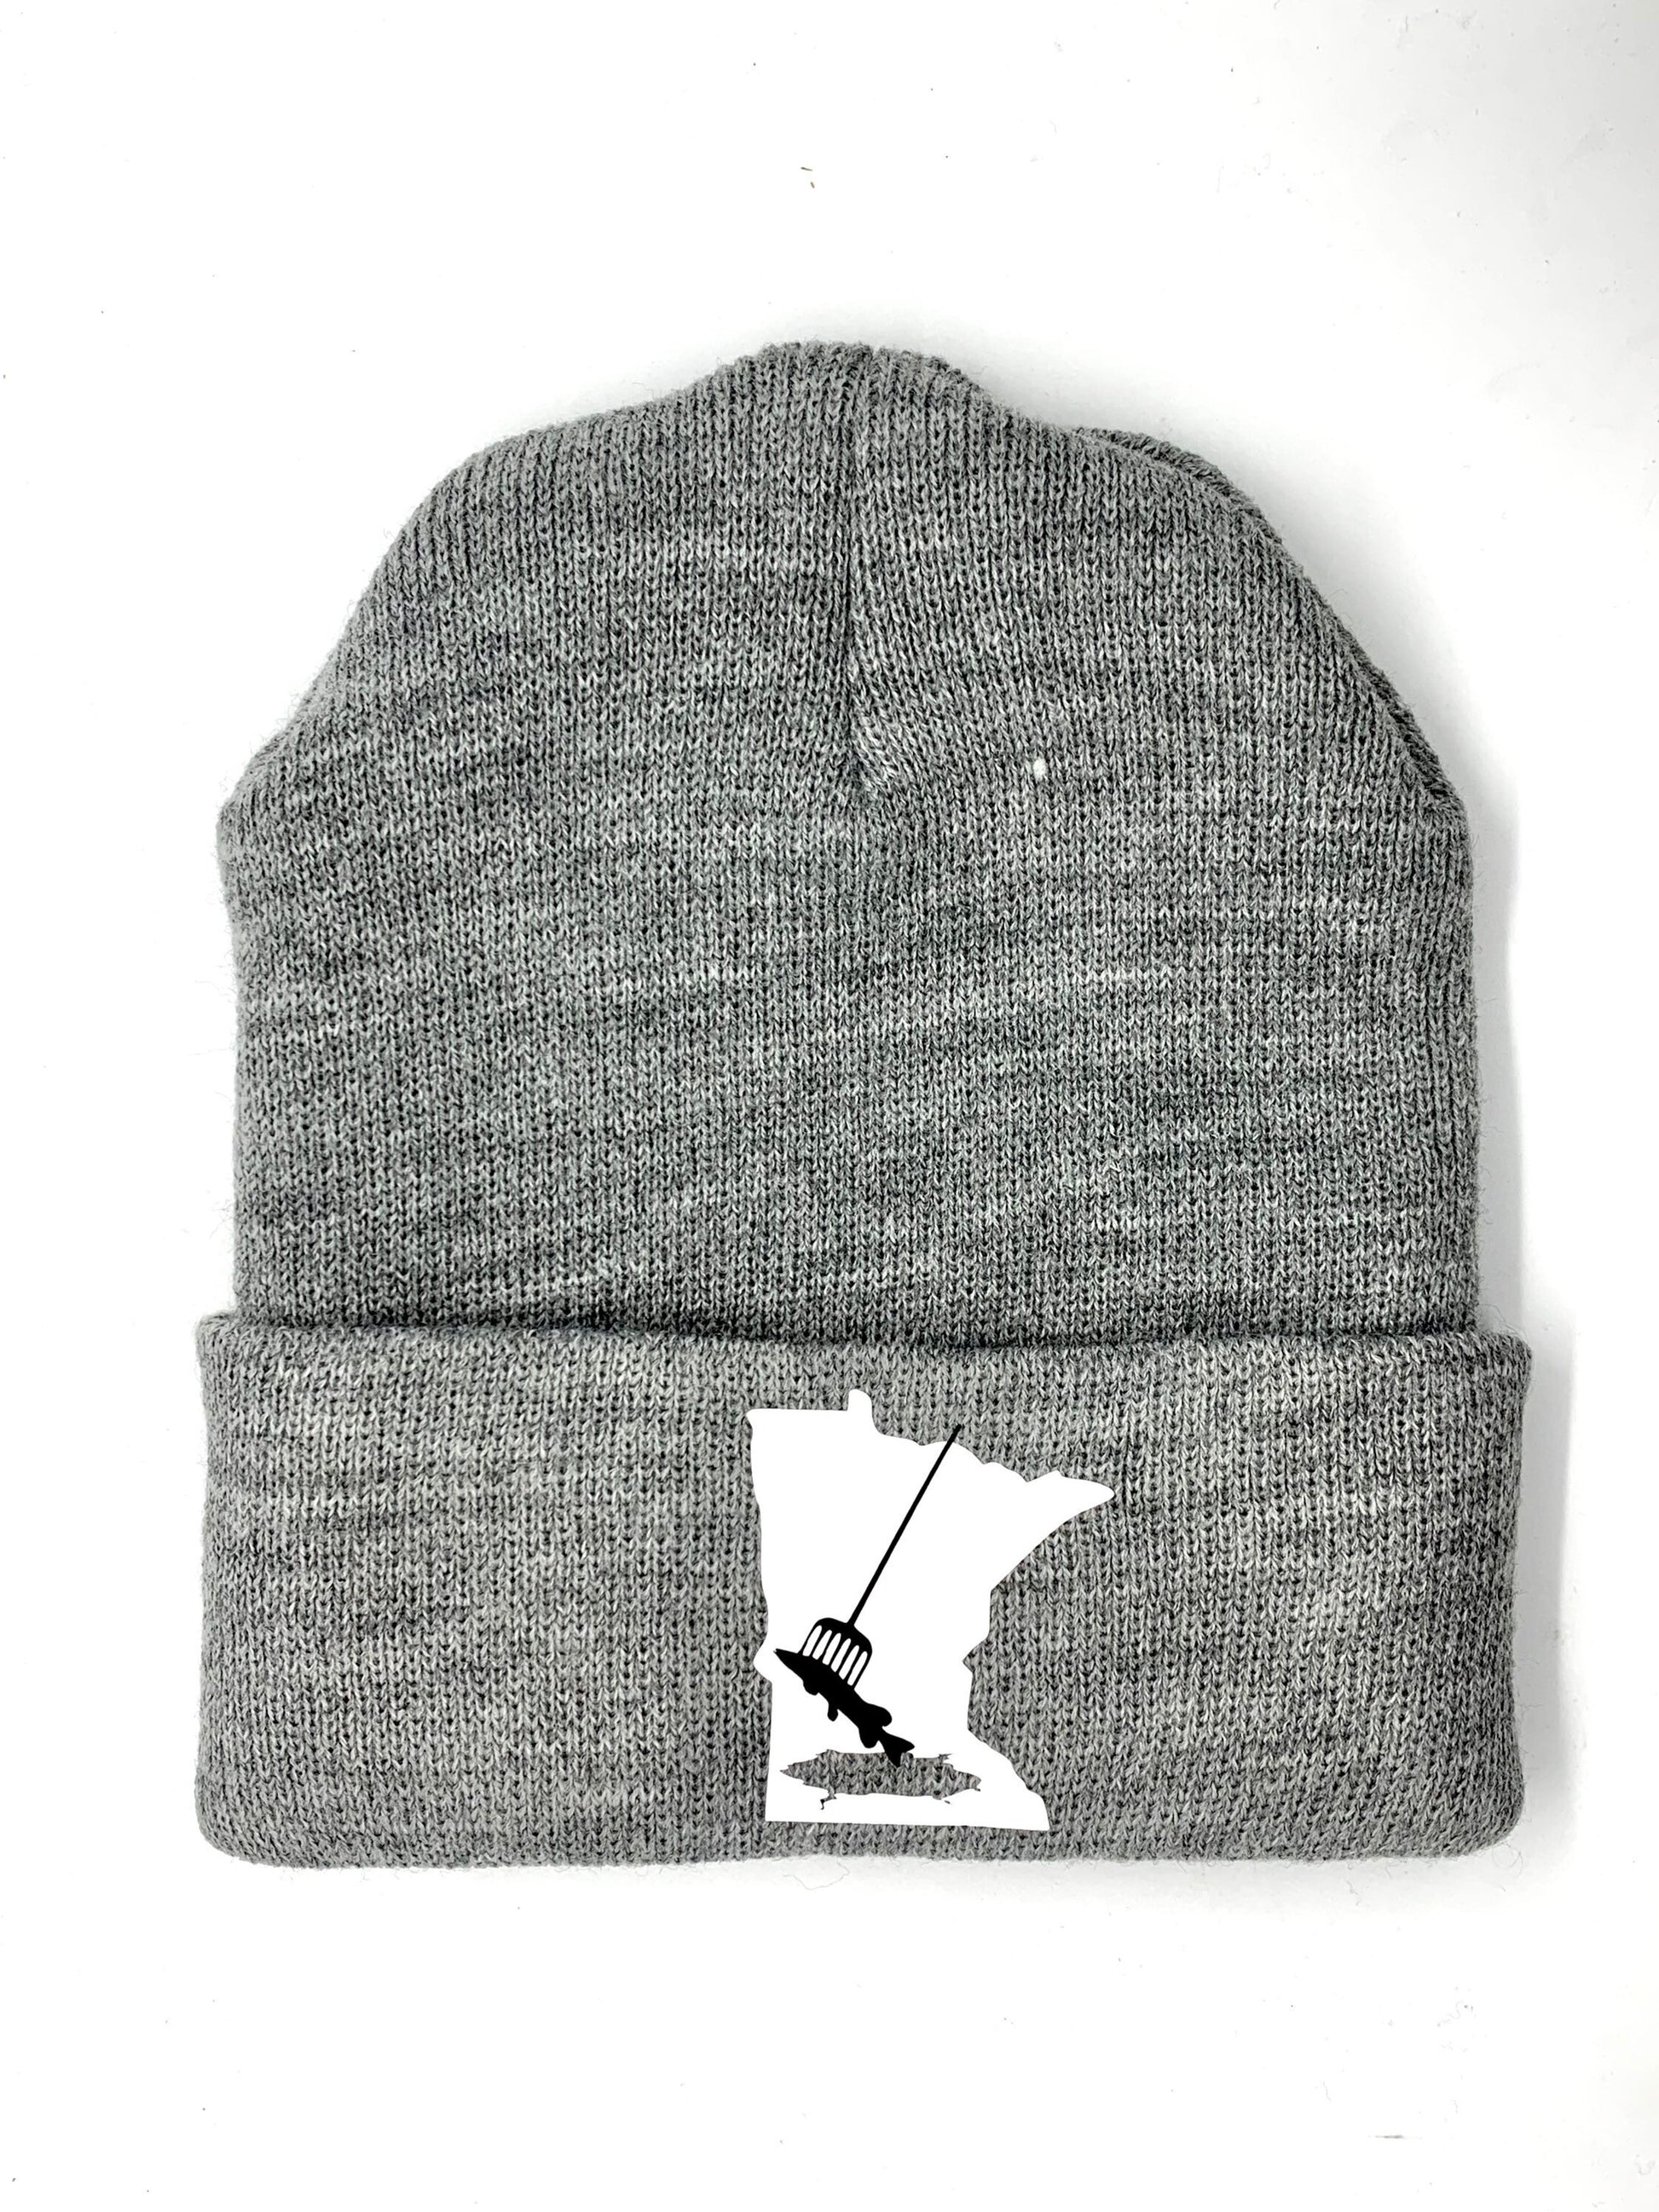 Any State Ice Spear Fishing Winter Knit Hat